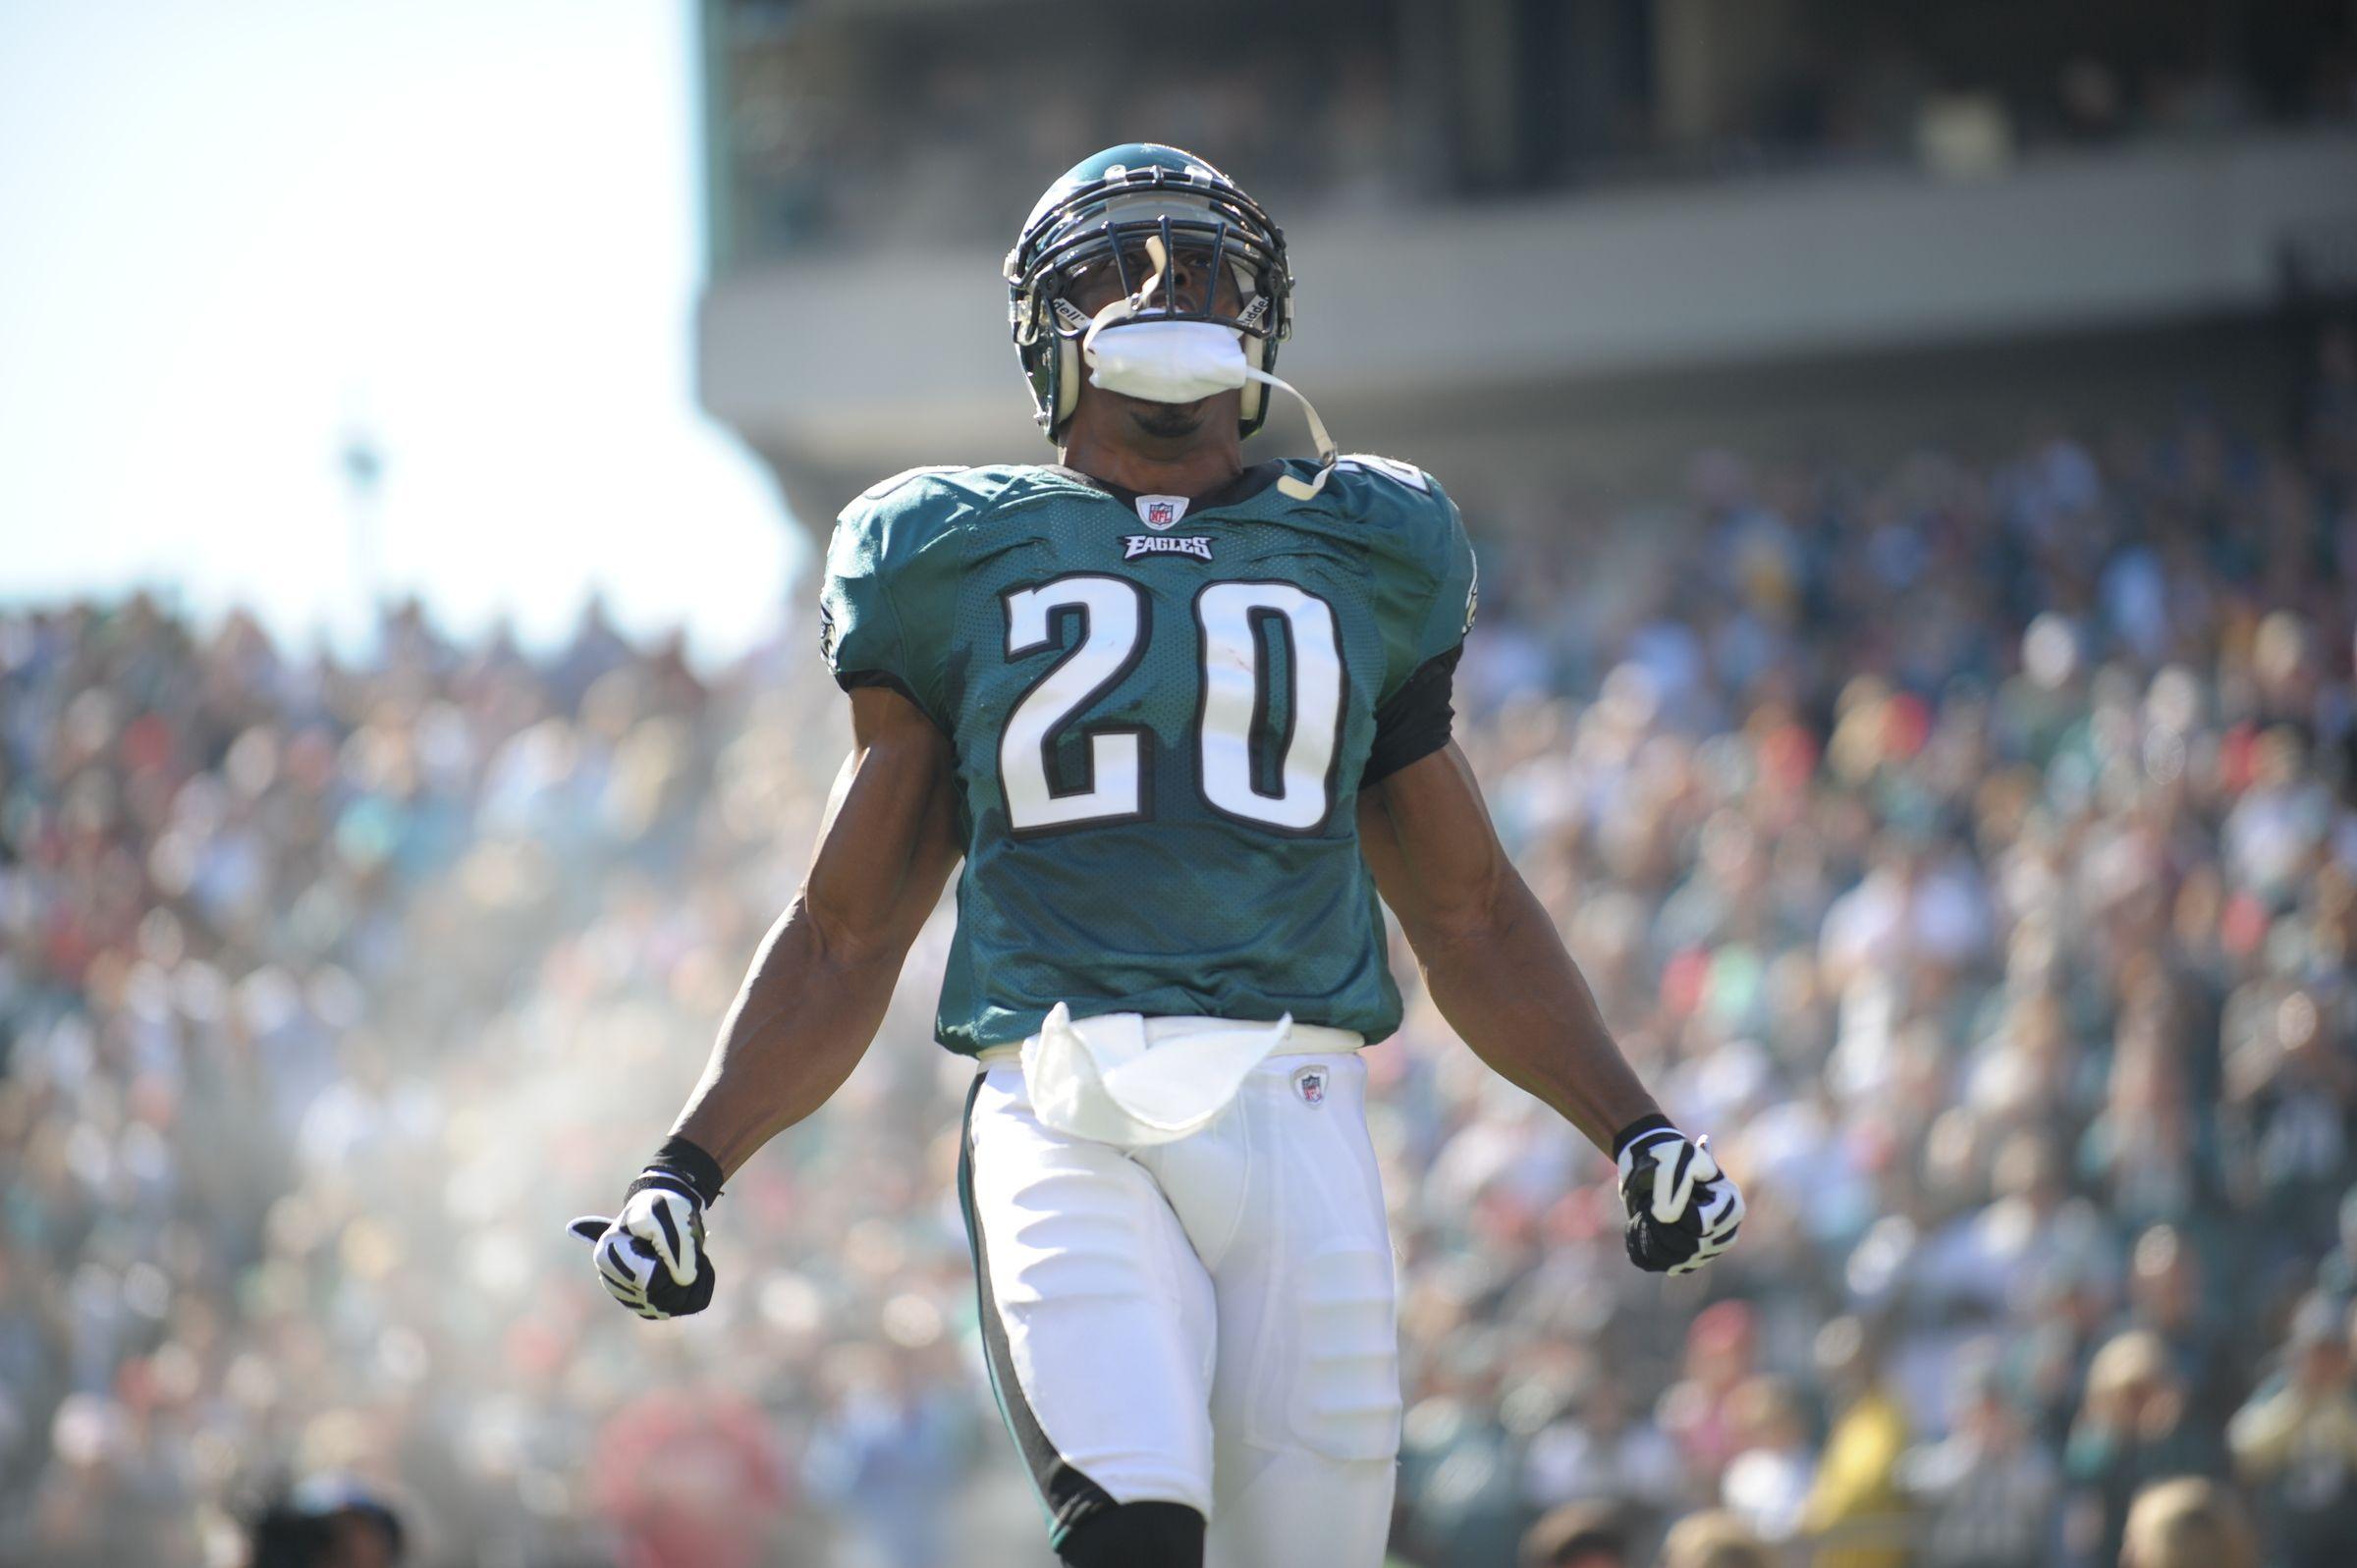 Brian Dawkins: This is what I'd tell voters about my HOF case.